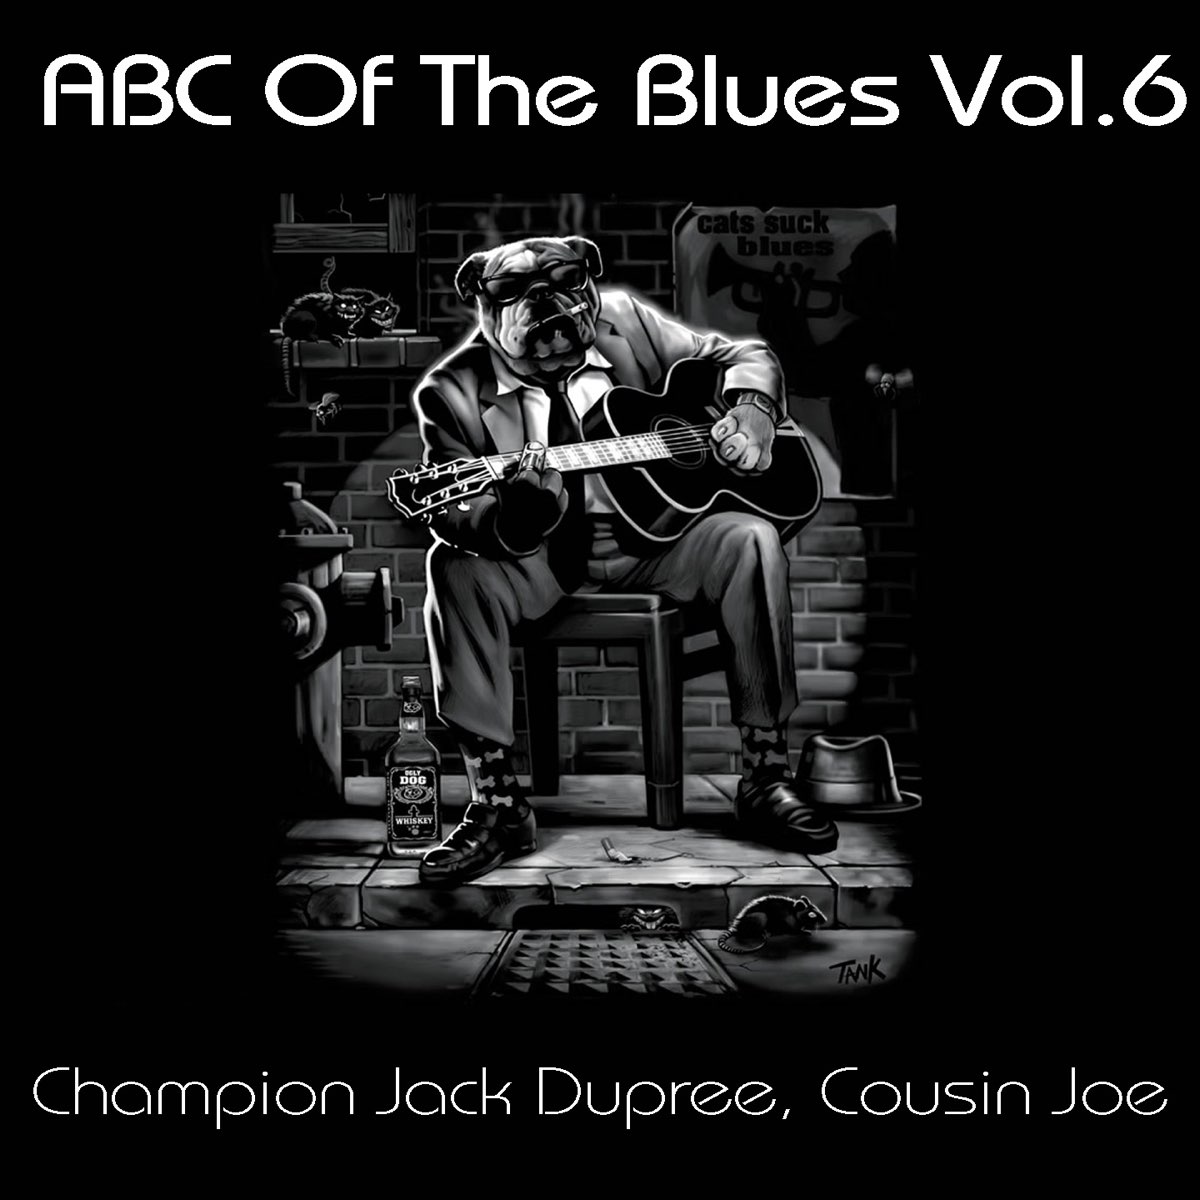 ABC of the Blues, Vol. 6 by Champion Jack Dupree & Cousin Joe on Apple Music